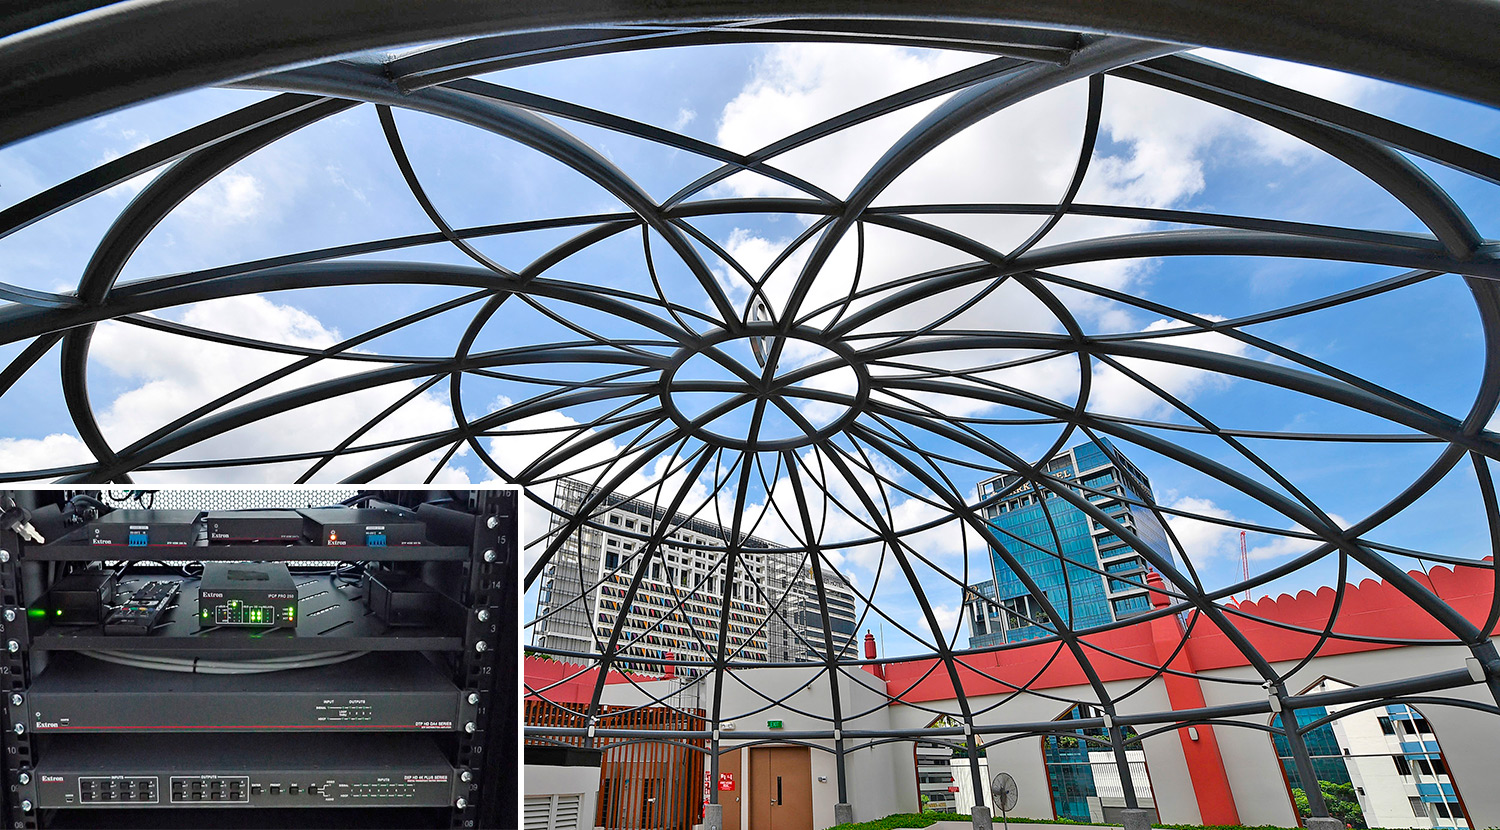 Lattice dome of outdoor pavilion with inset image of matrix switcher and distribution amplifier